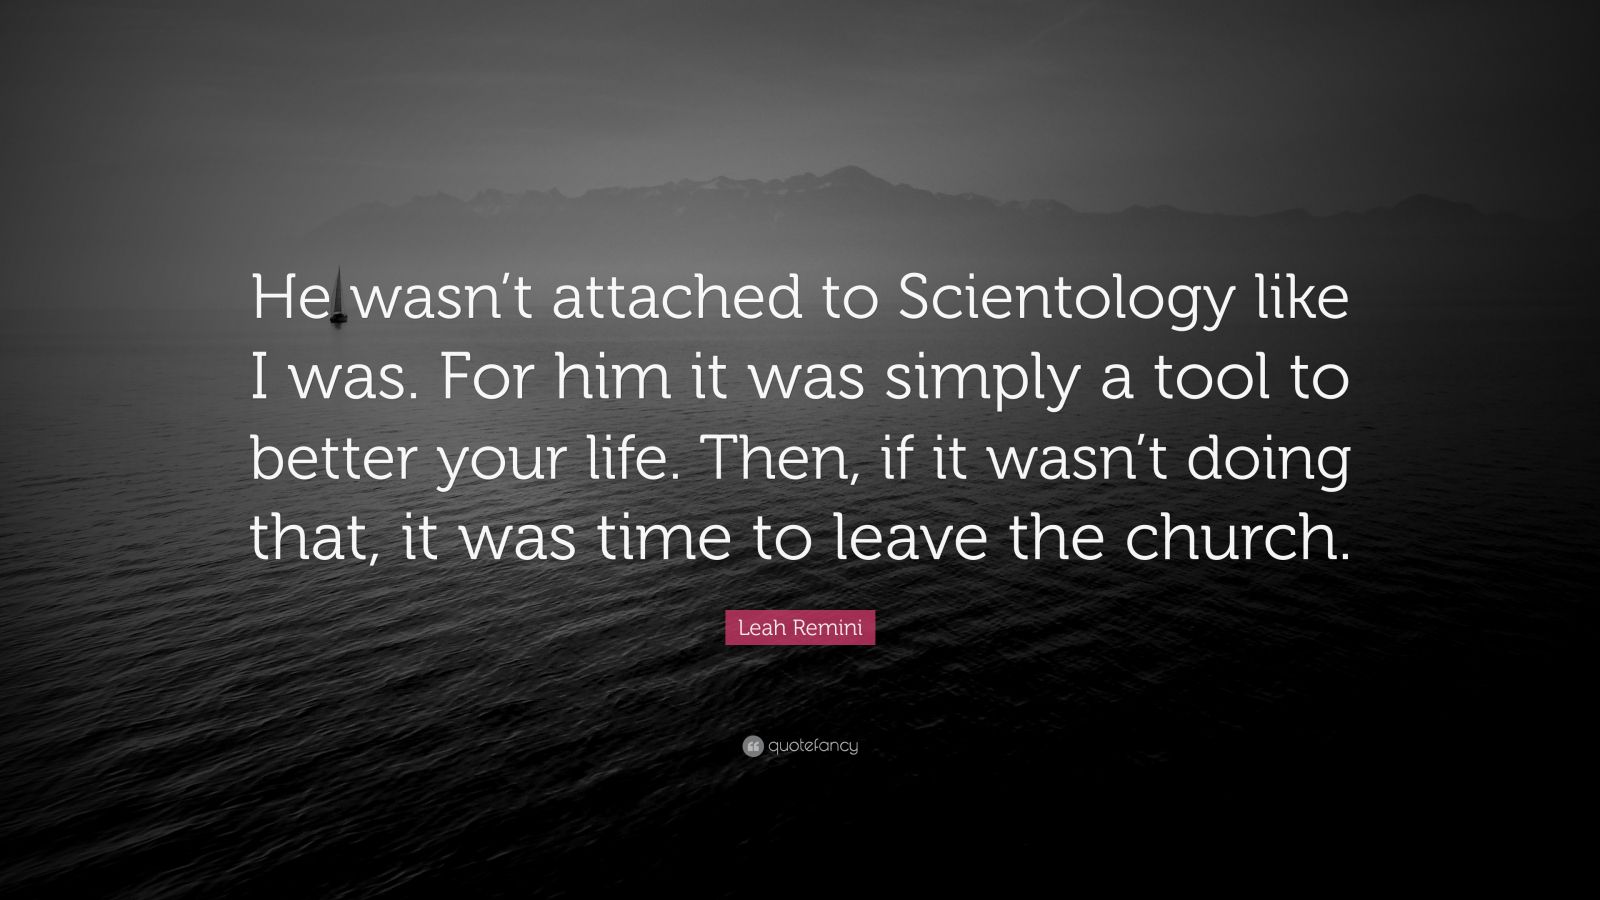 Leah Remini Quote: “He wasn’t attached to Scientology like I was. For ...